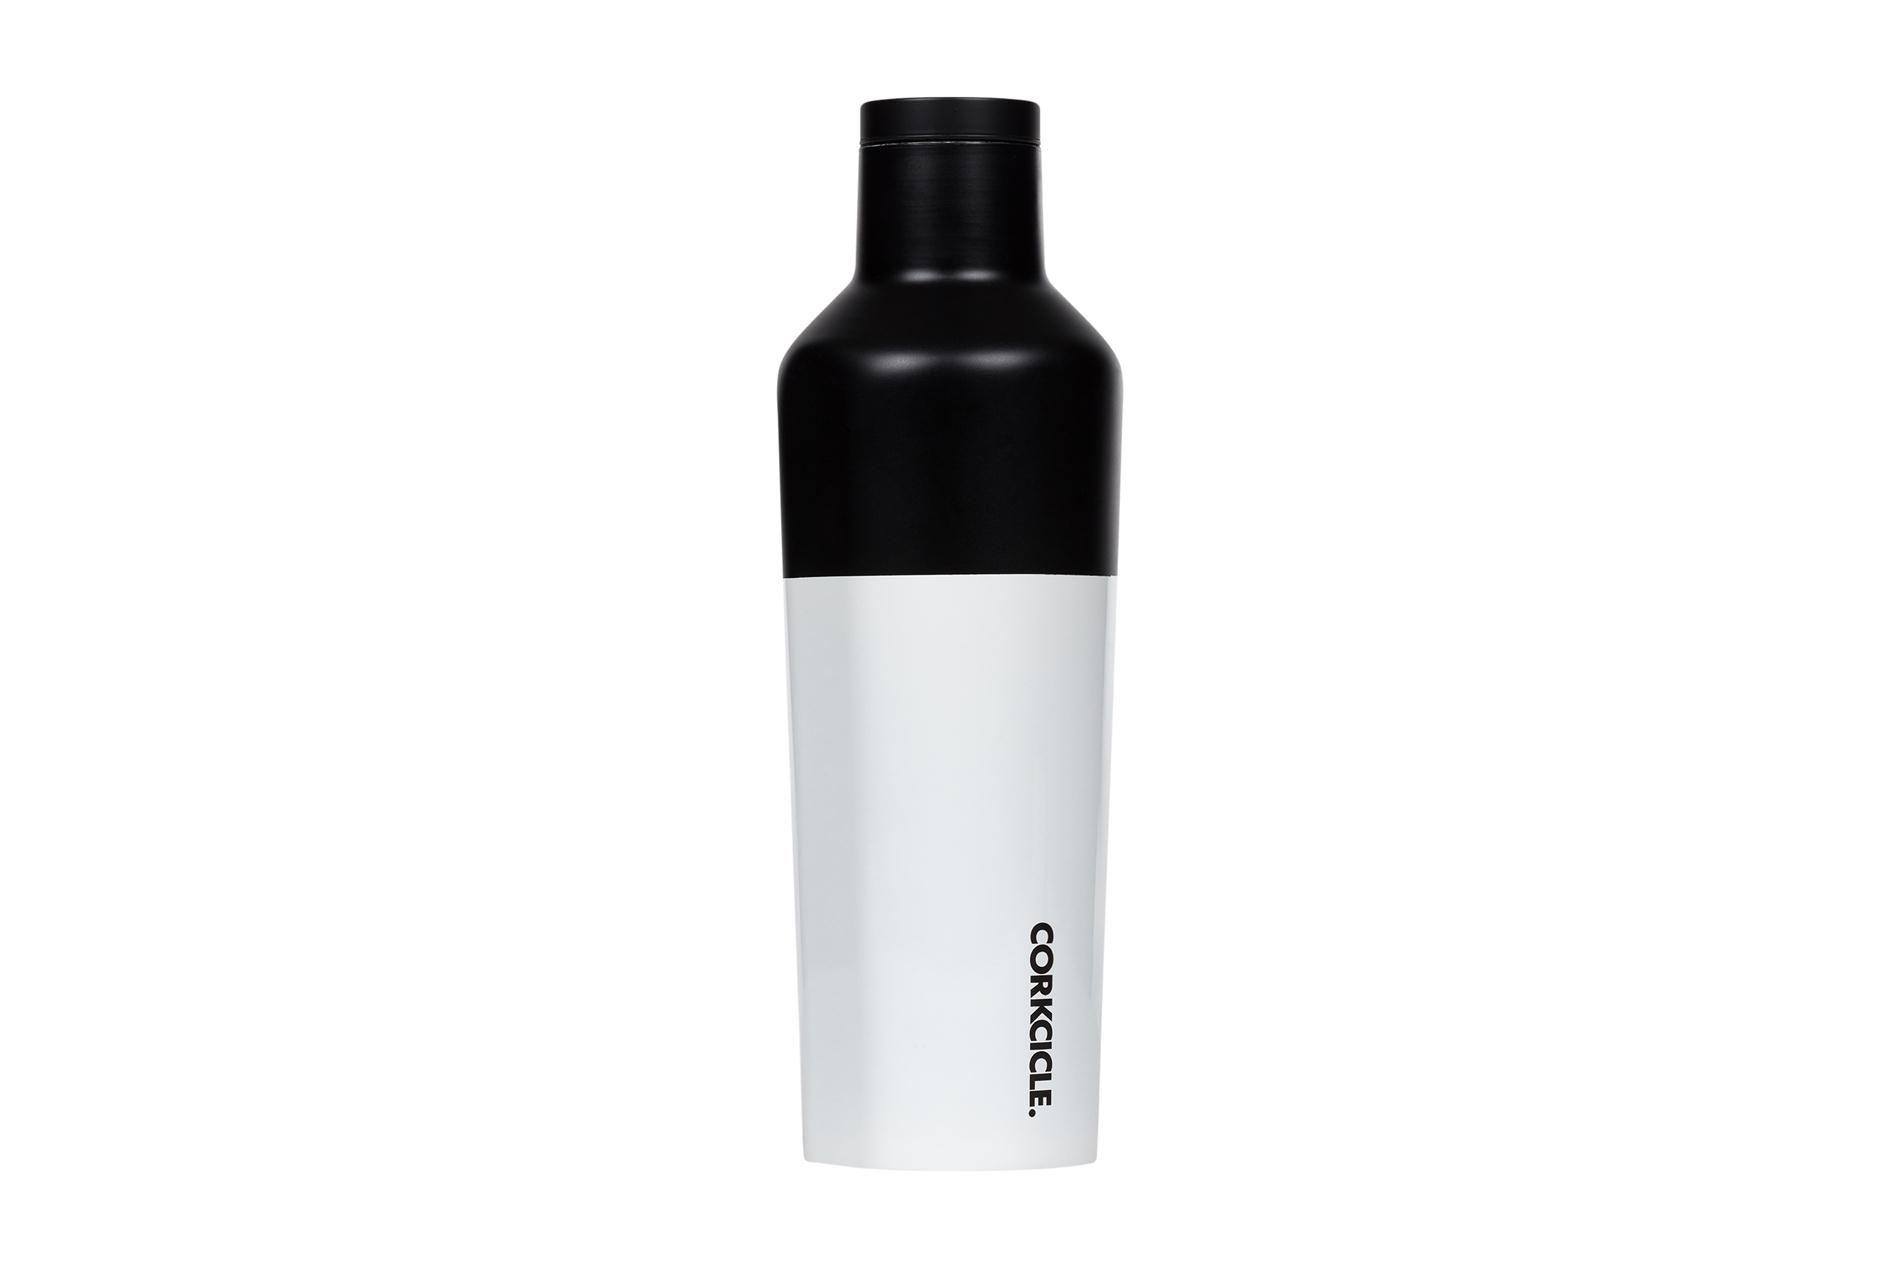 Corkcicle Trinkflasche / Thermo Isolierflasche Modern Black 475 ml Color Block